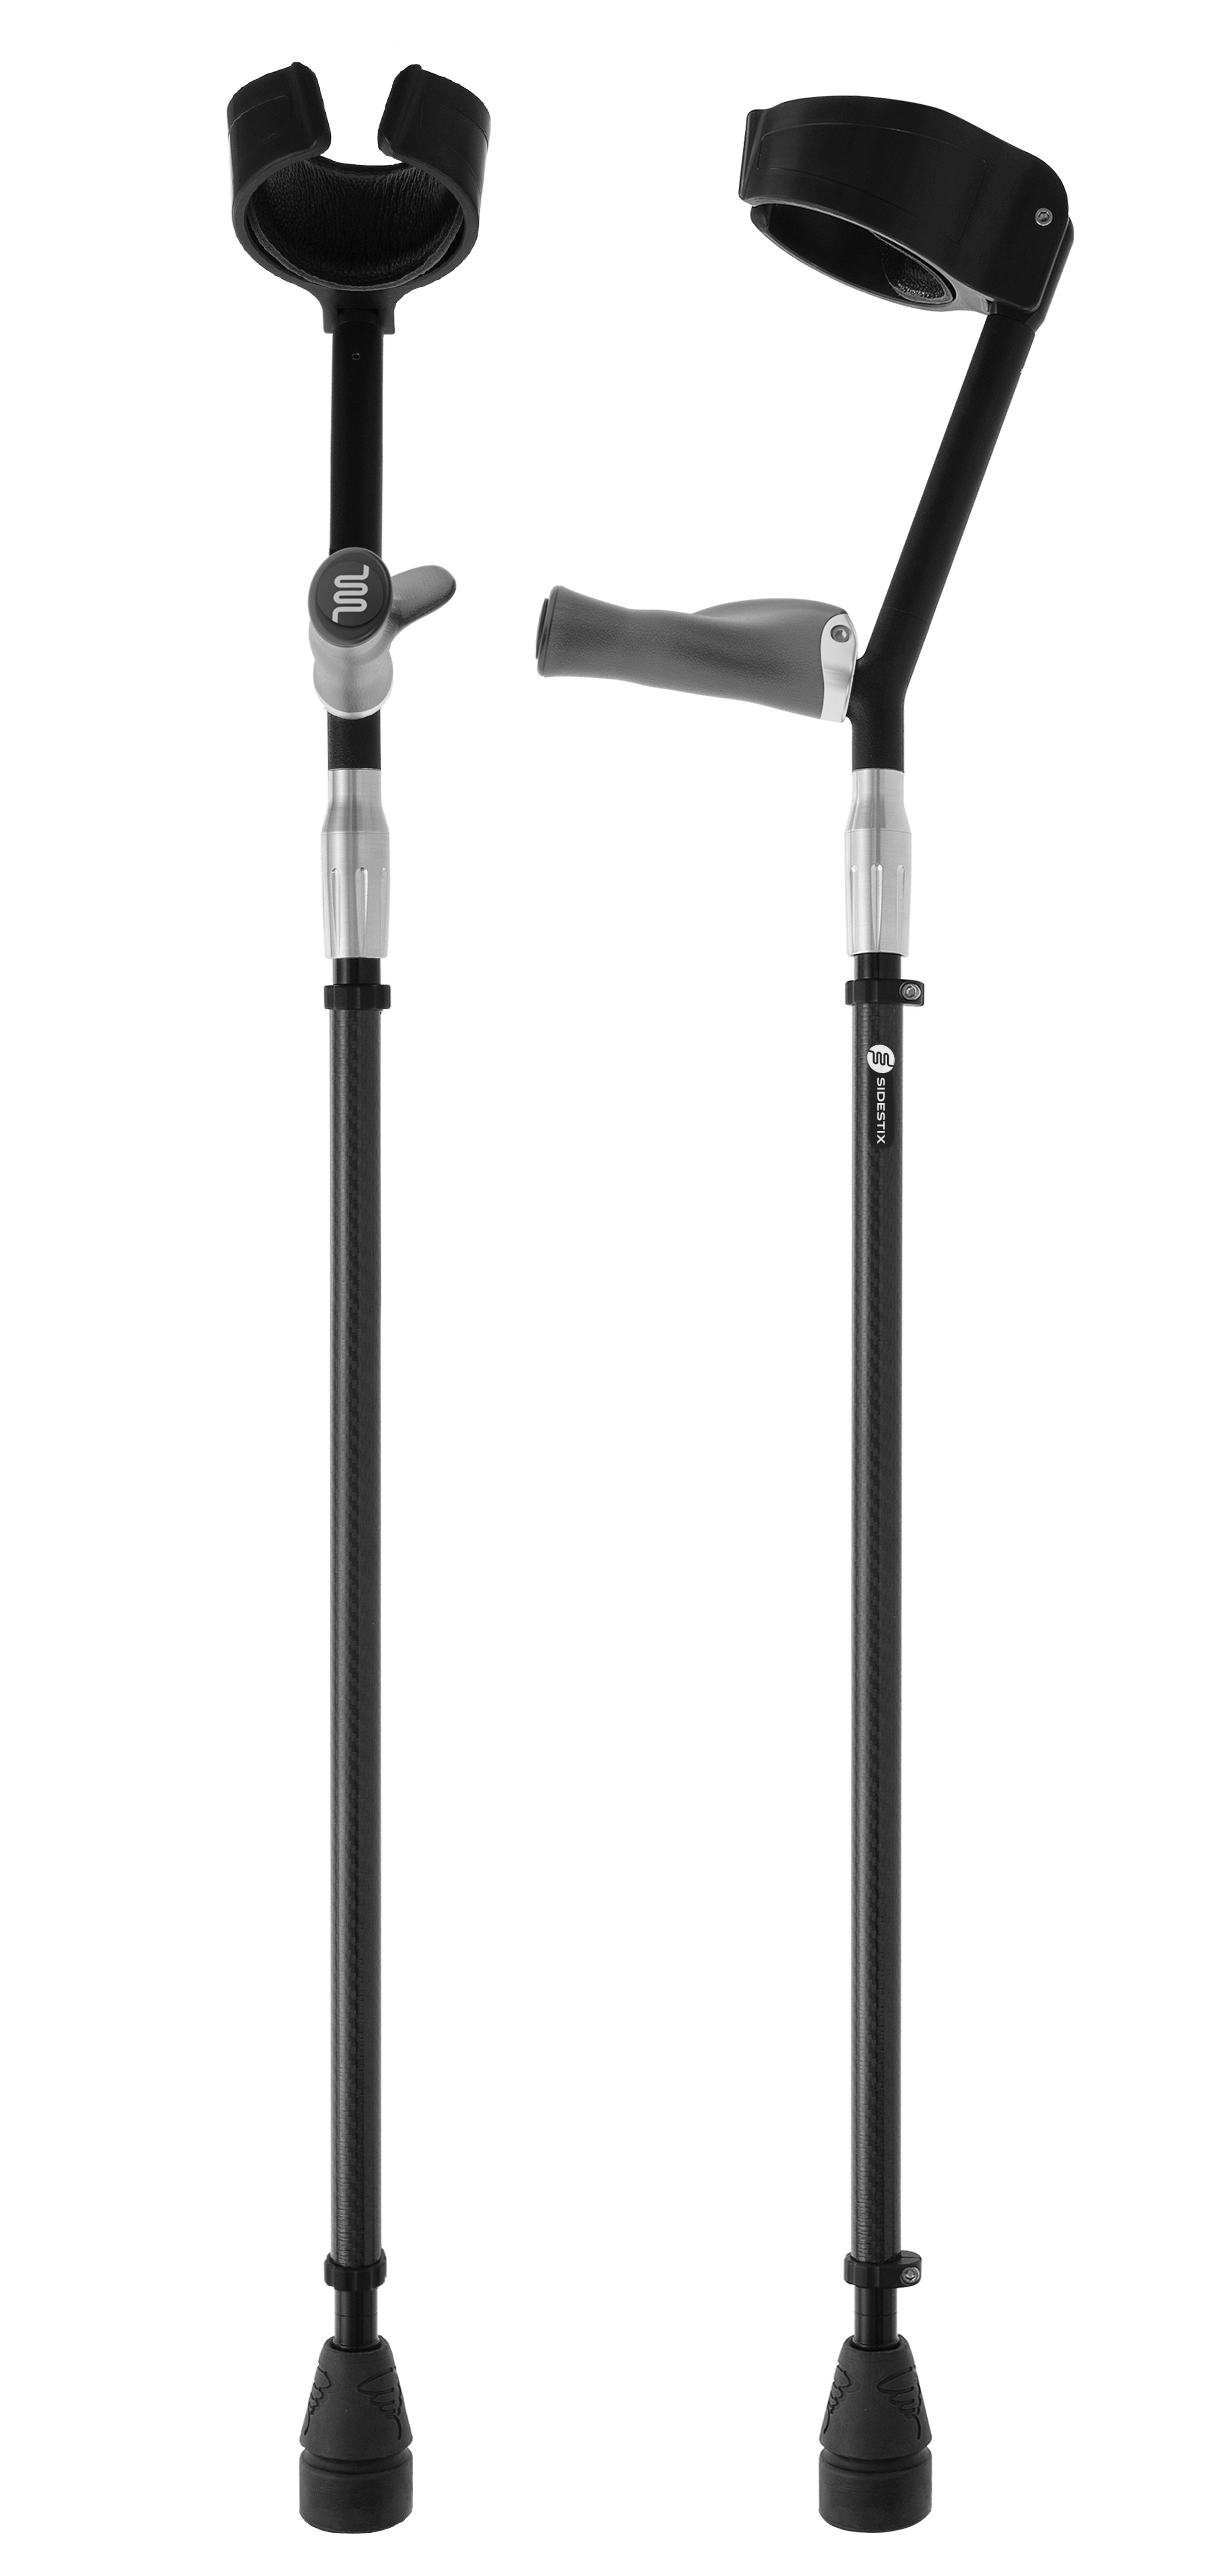 Crutches PNG